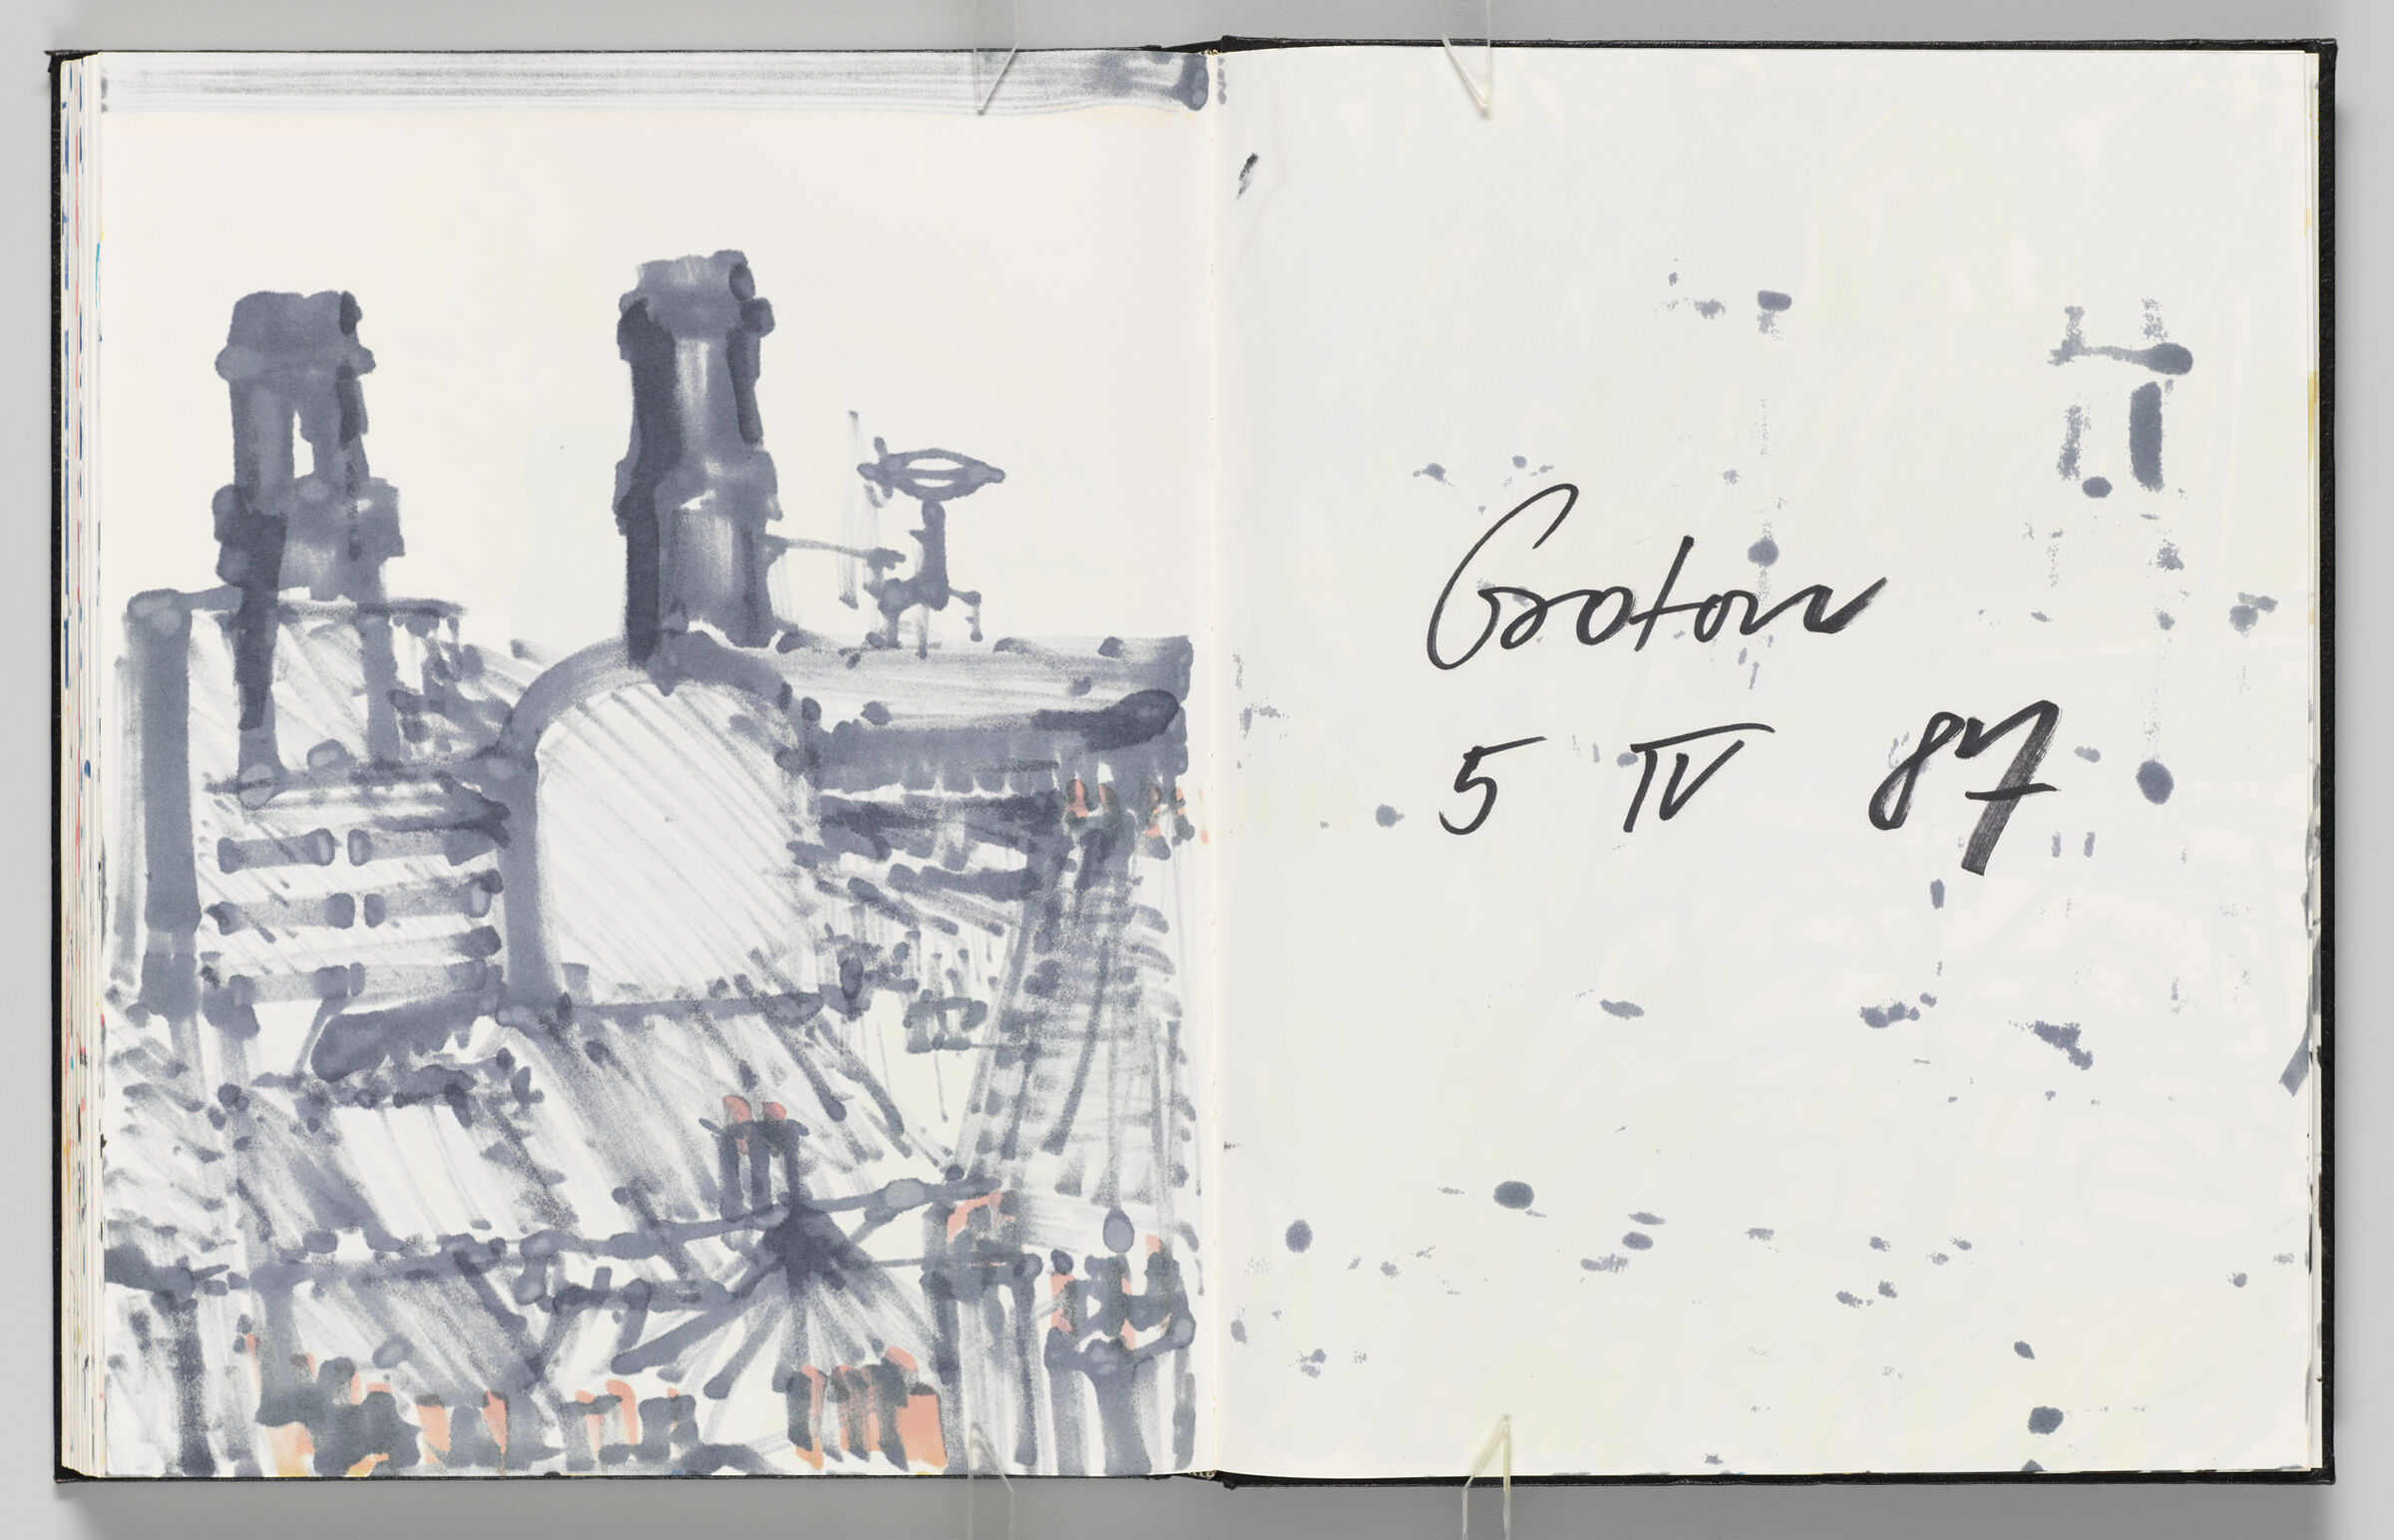 Untitled (Bleed-Through Of Previous Page, Left Page); Untitled (Note With Color Transfer, Right Page)